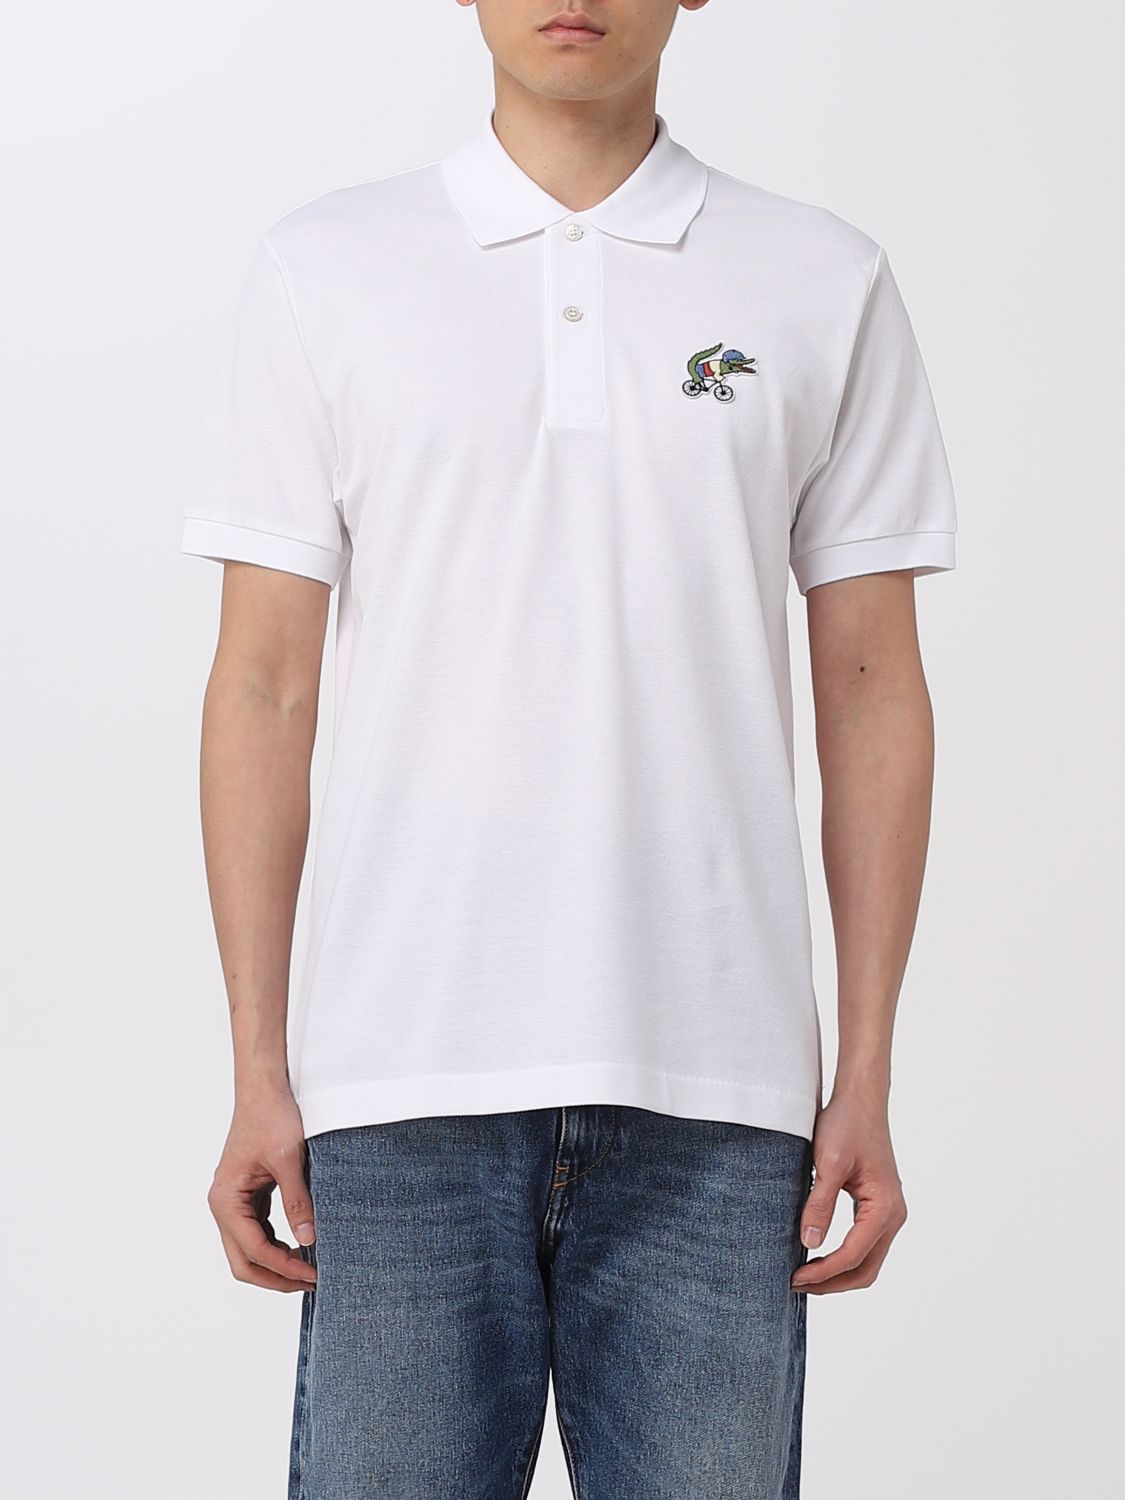 Lacoste X Netflix Outlet: polo shirt for man White | Lacoste X Netflix polo PH7057 online GIGLIO.COM